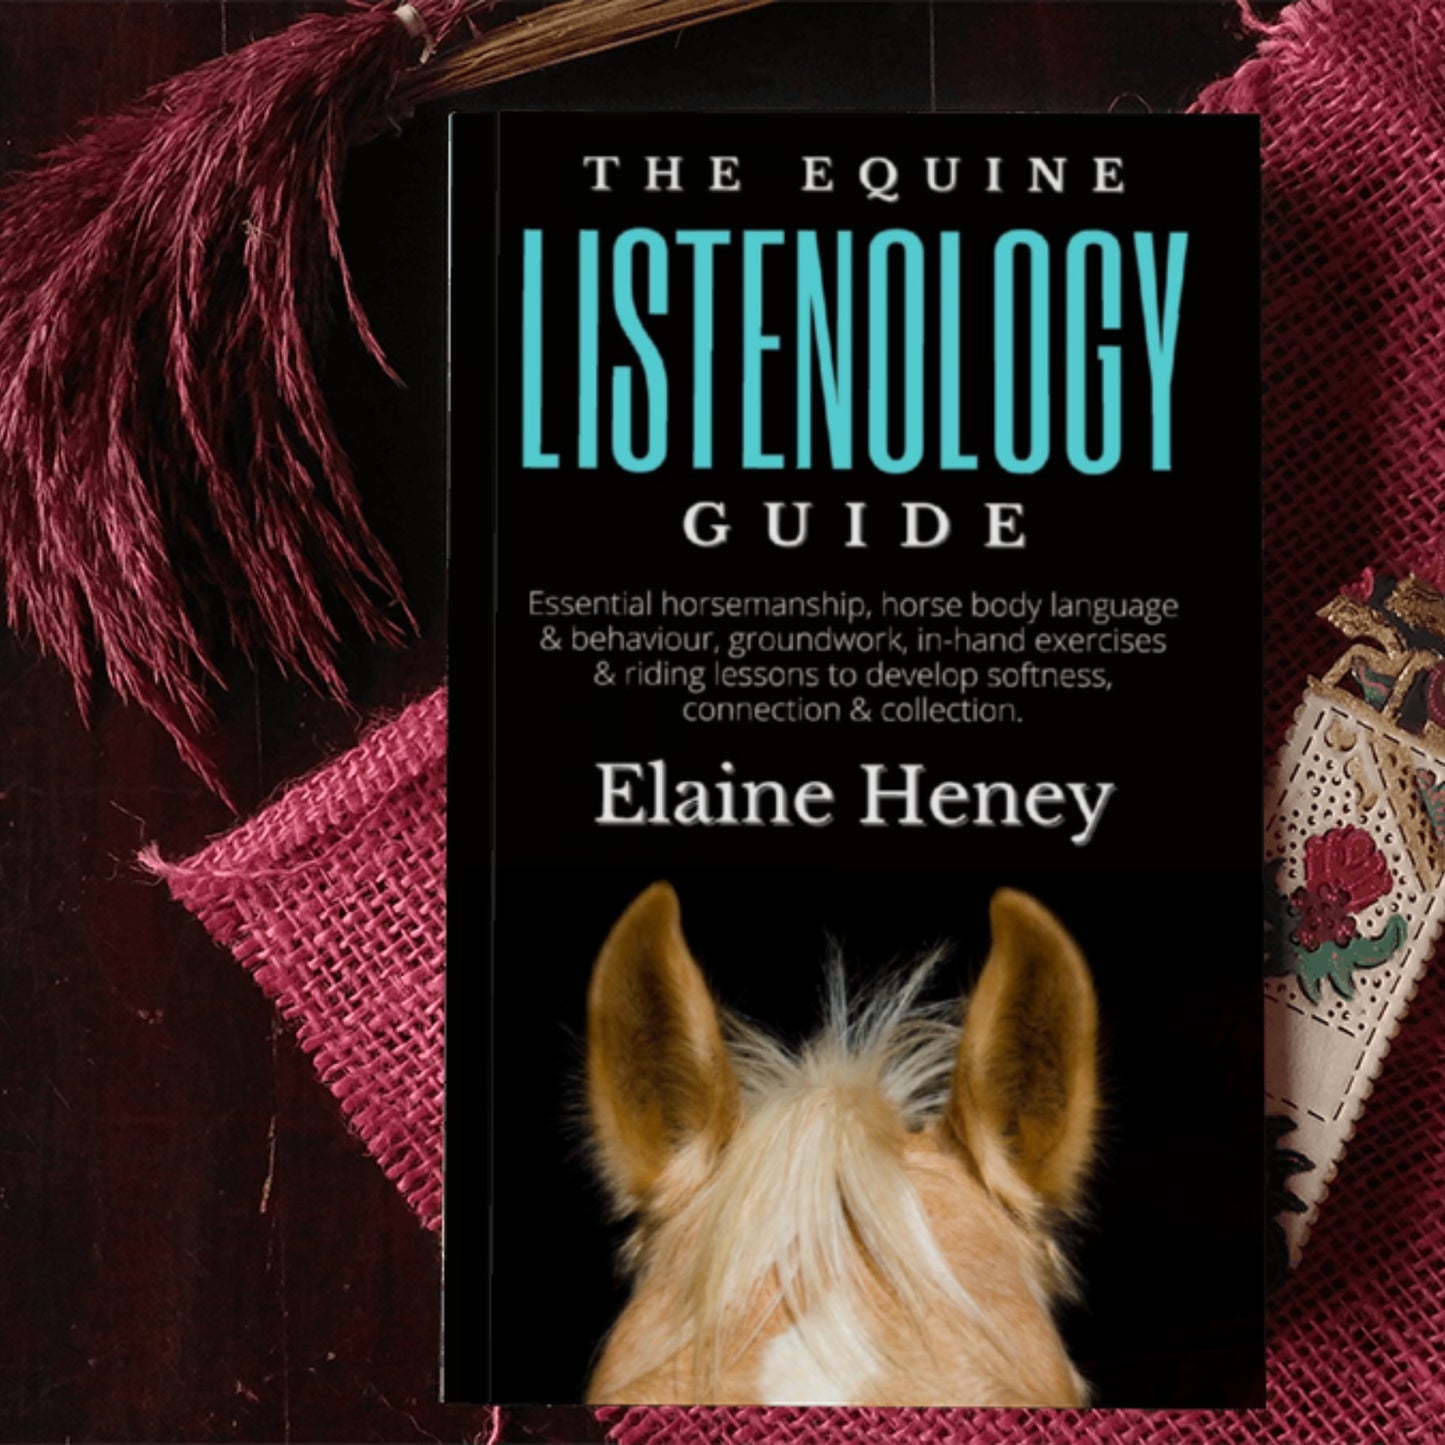 The Equine Listenology Guide - Essential horsemanship, horse body language & behaviour, groundwork, in-hand exercises & riding lessons